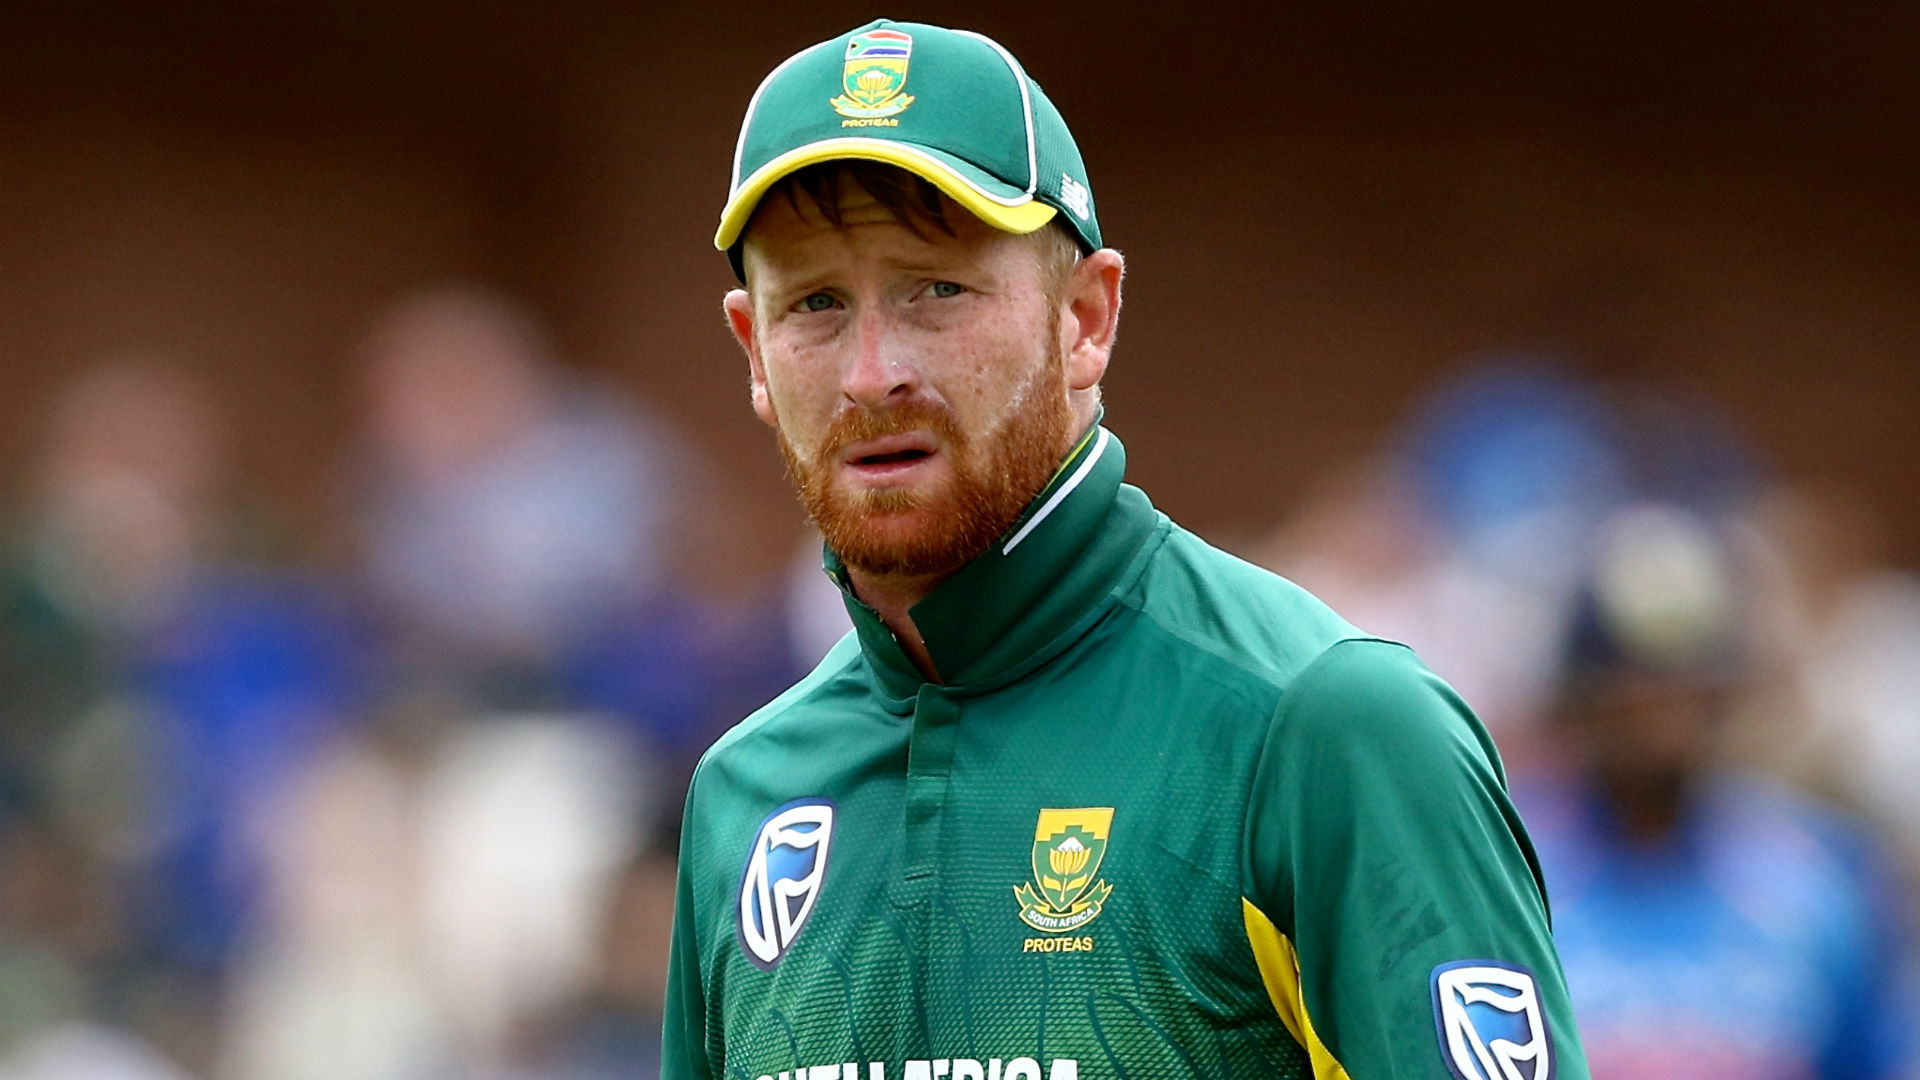 South Africa wicketkeeper-batsman Heinrich Klaasen went unsold at the IPL auction but will now replace Steve Smith at Rajasthan Royals.